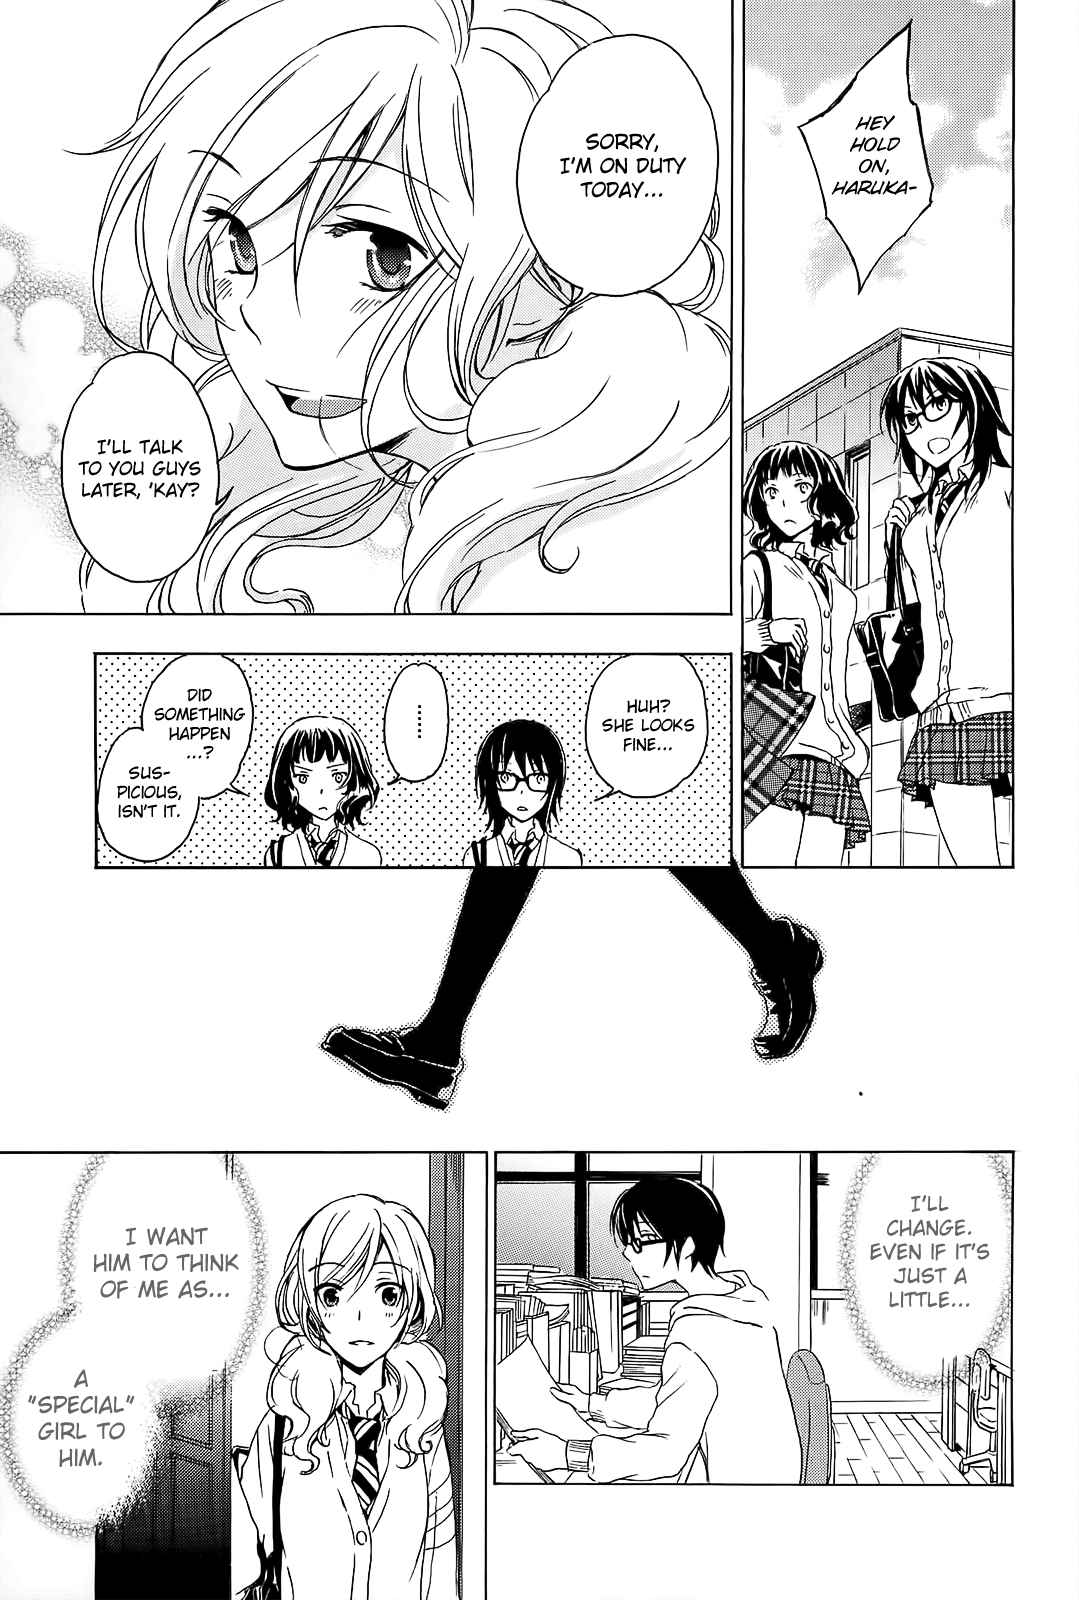 A Method to Make the Gentle World Vol.1 Ch.5